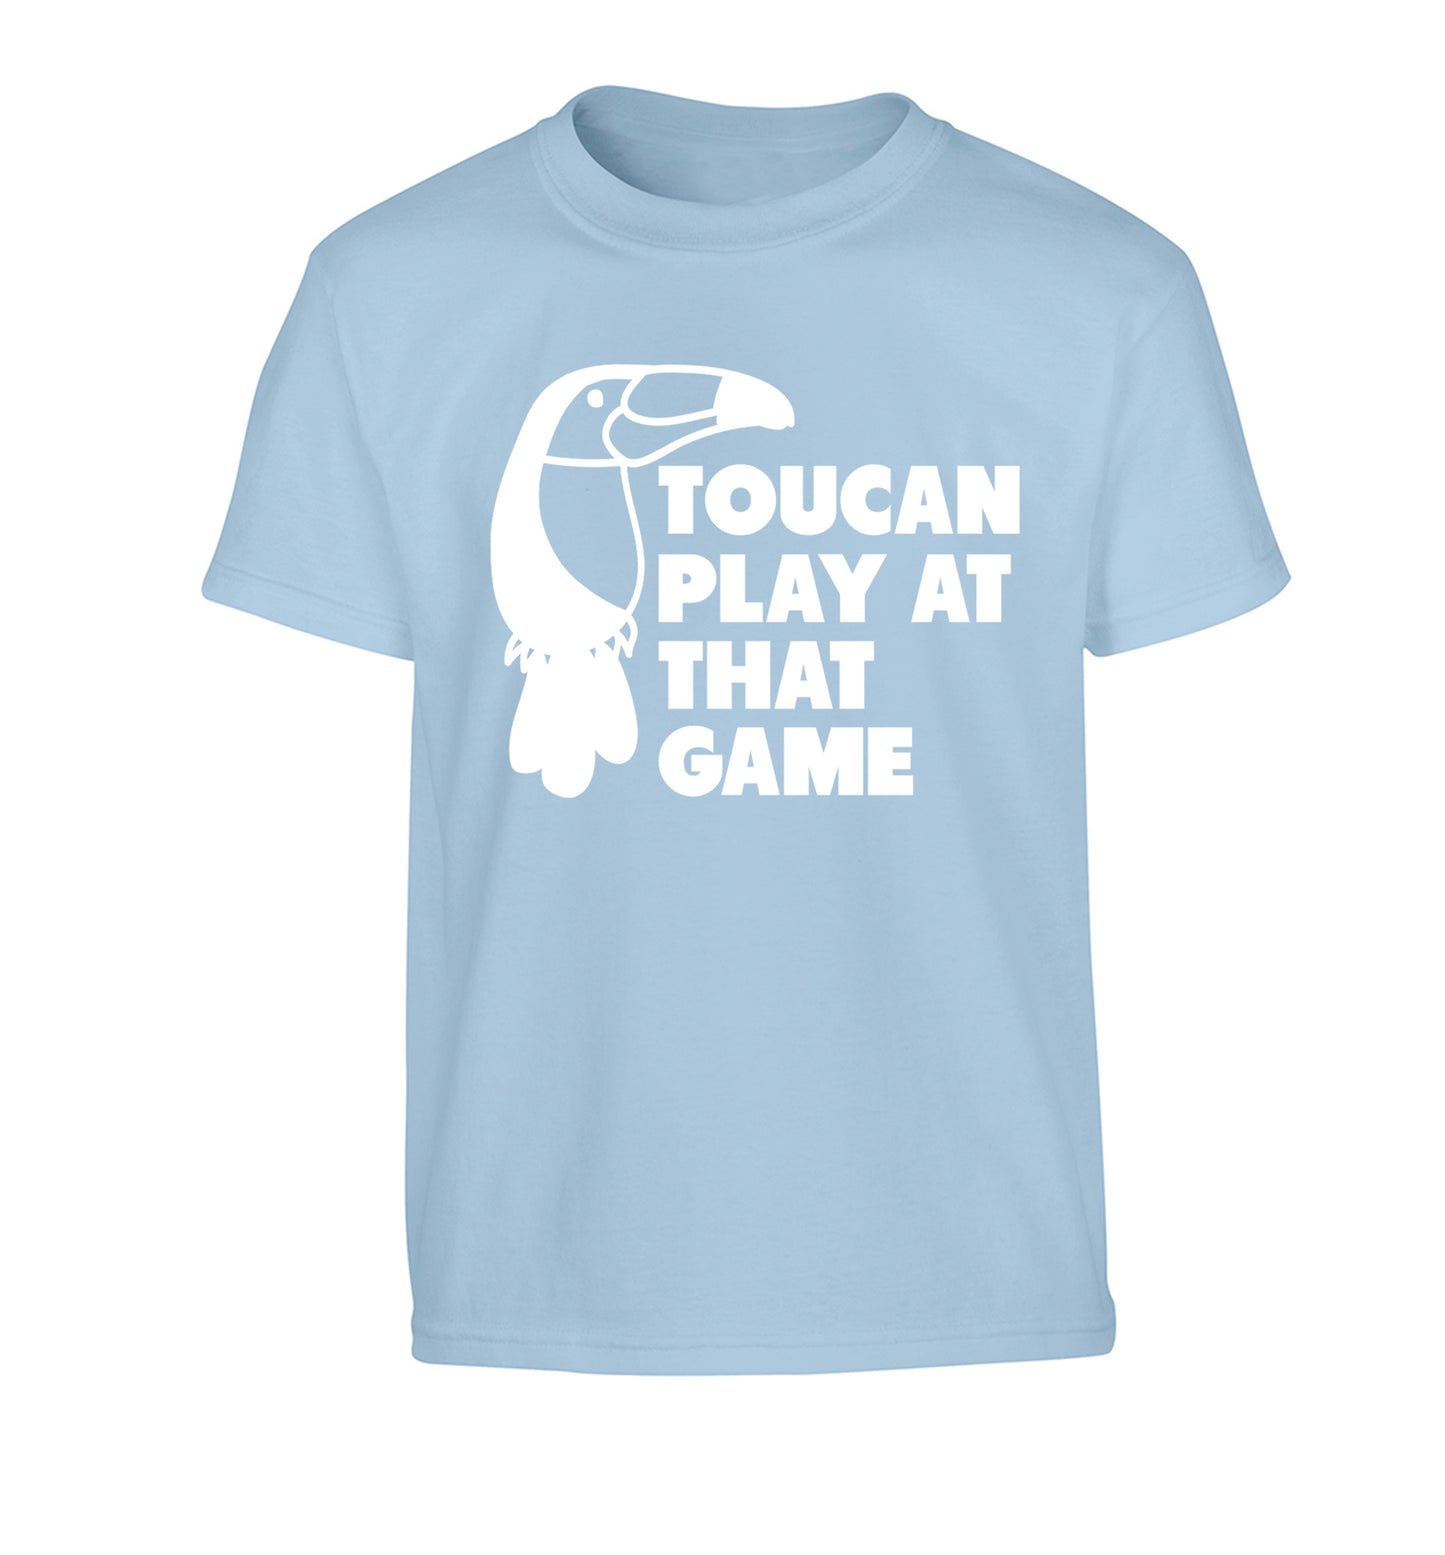 Toucan play at that game Children's light blue Tshirt 12-13 Years